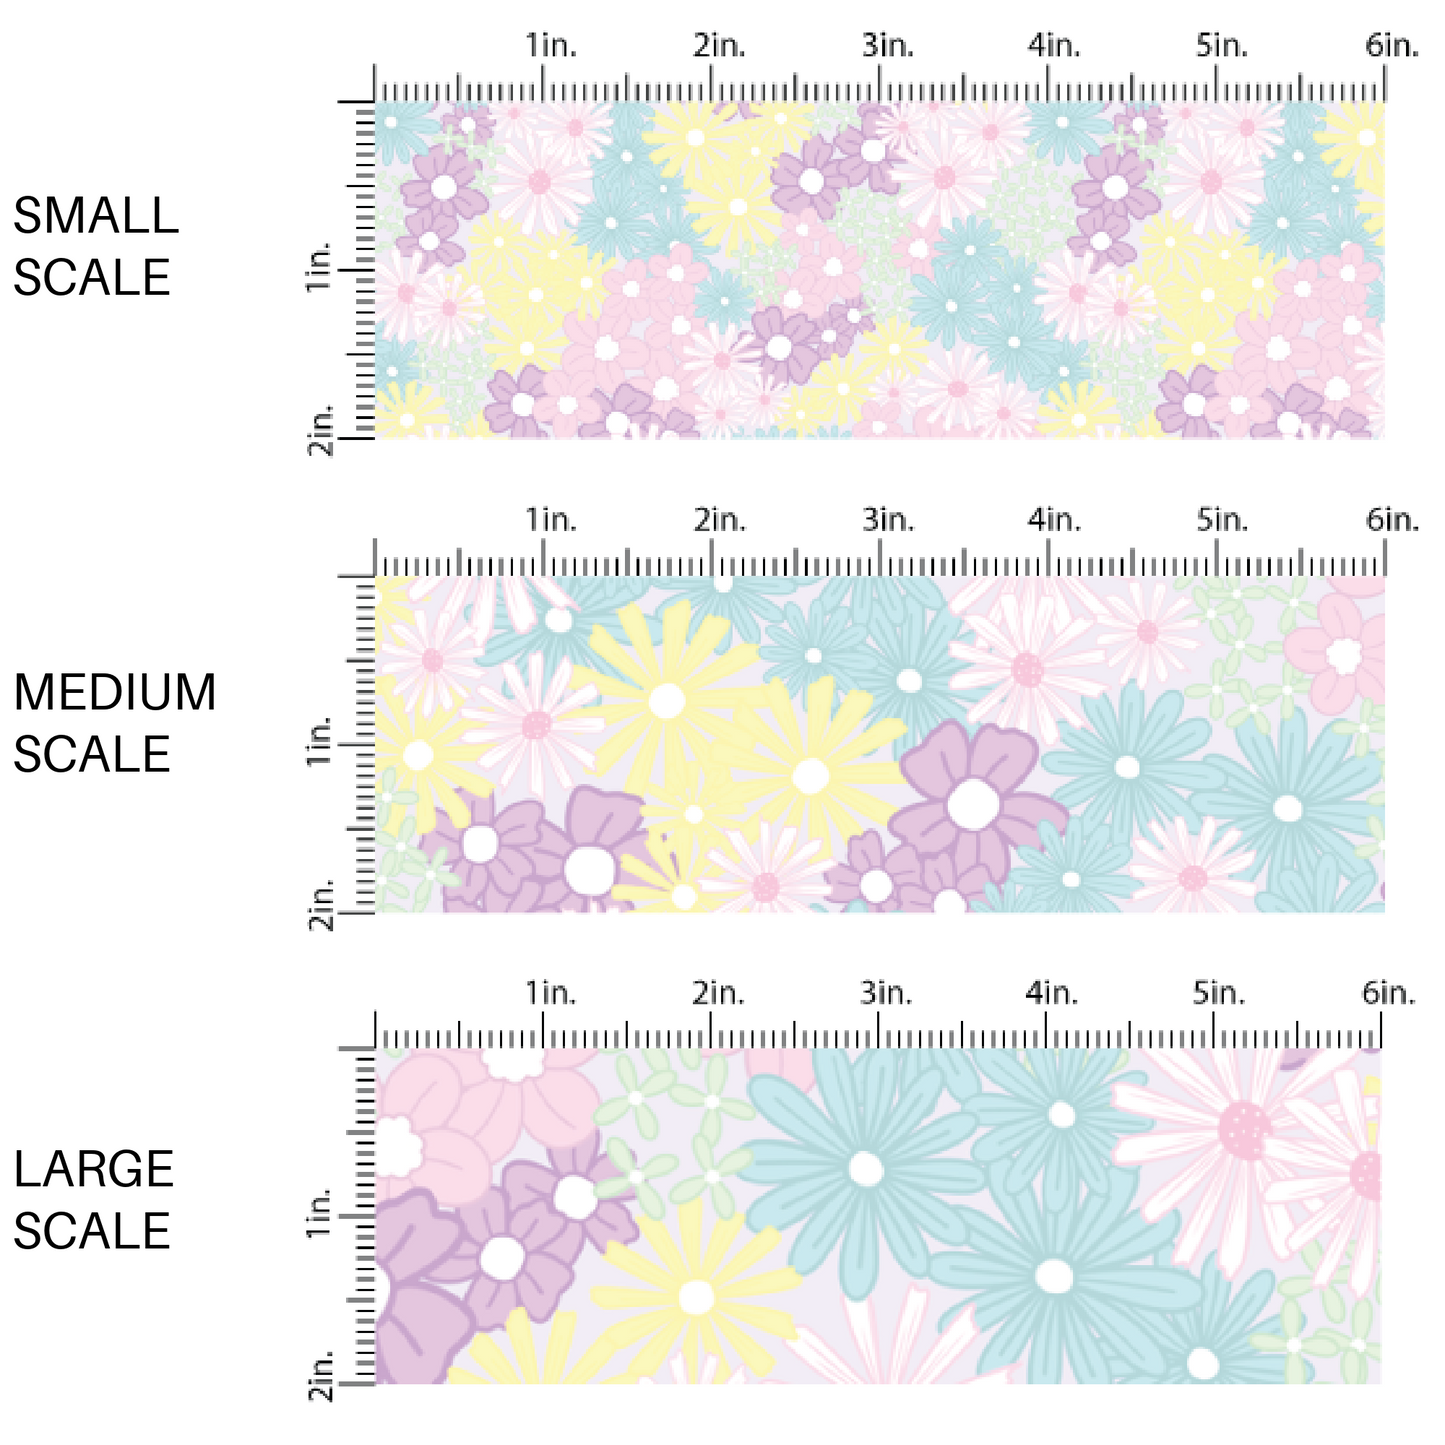 Purple, Blue, Pink, and Yellow Floral Spring Themed Fabric by the Yard scaled image guide.